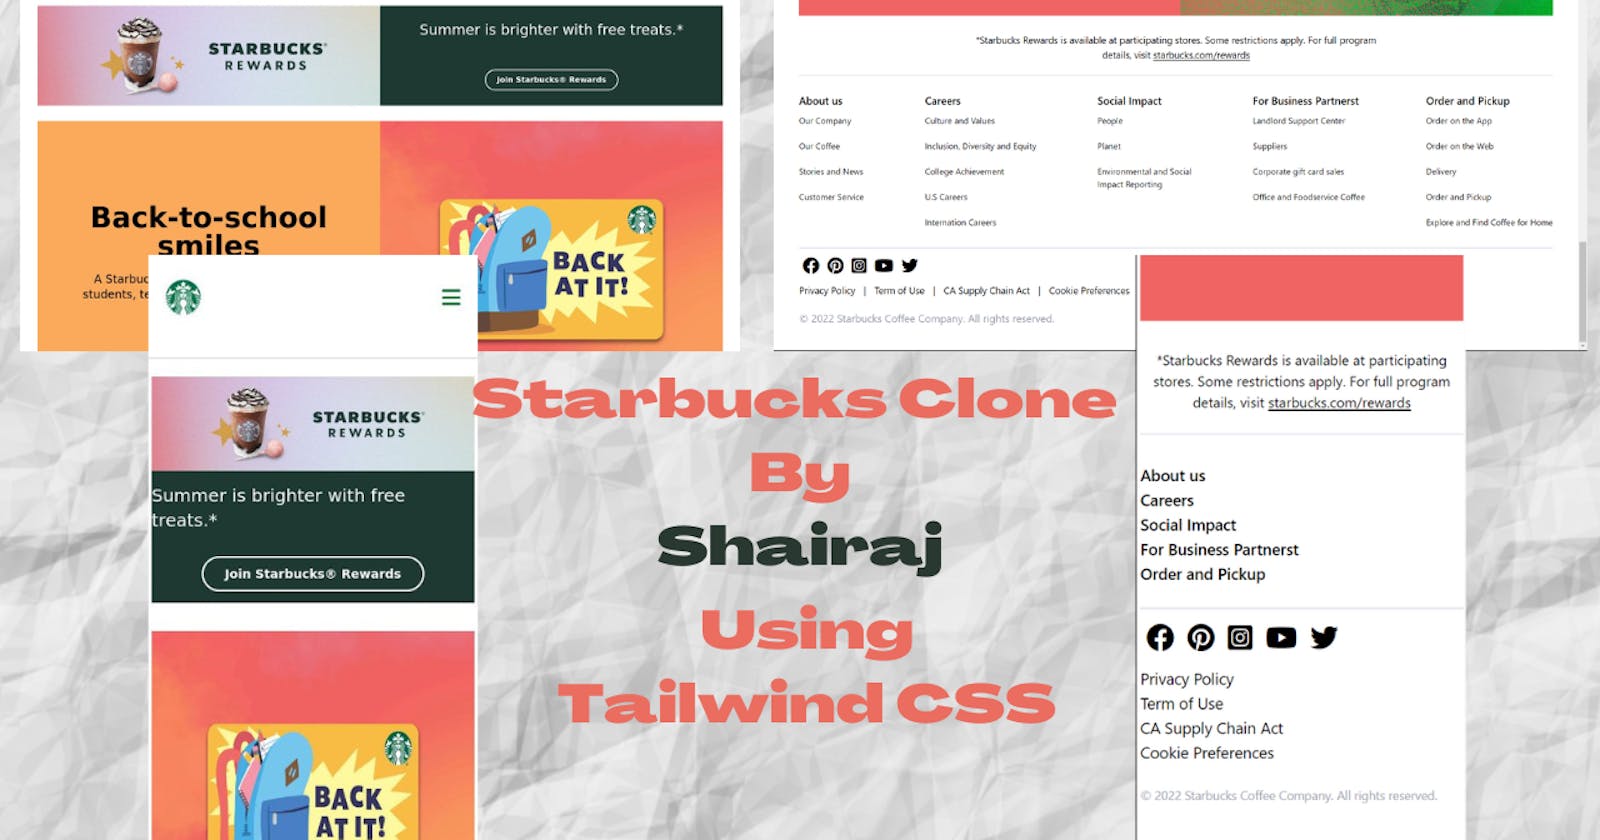 First Project Using Tailwind CSS (Starbucks-clone)